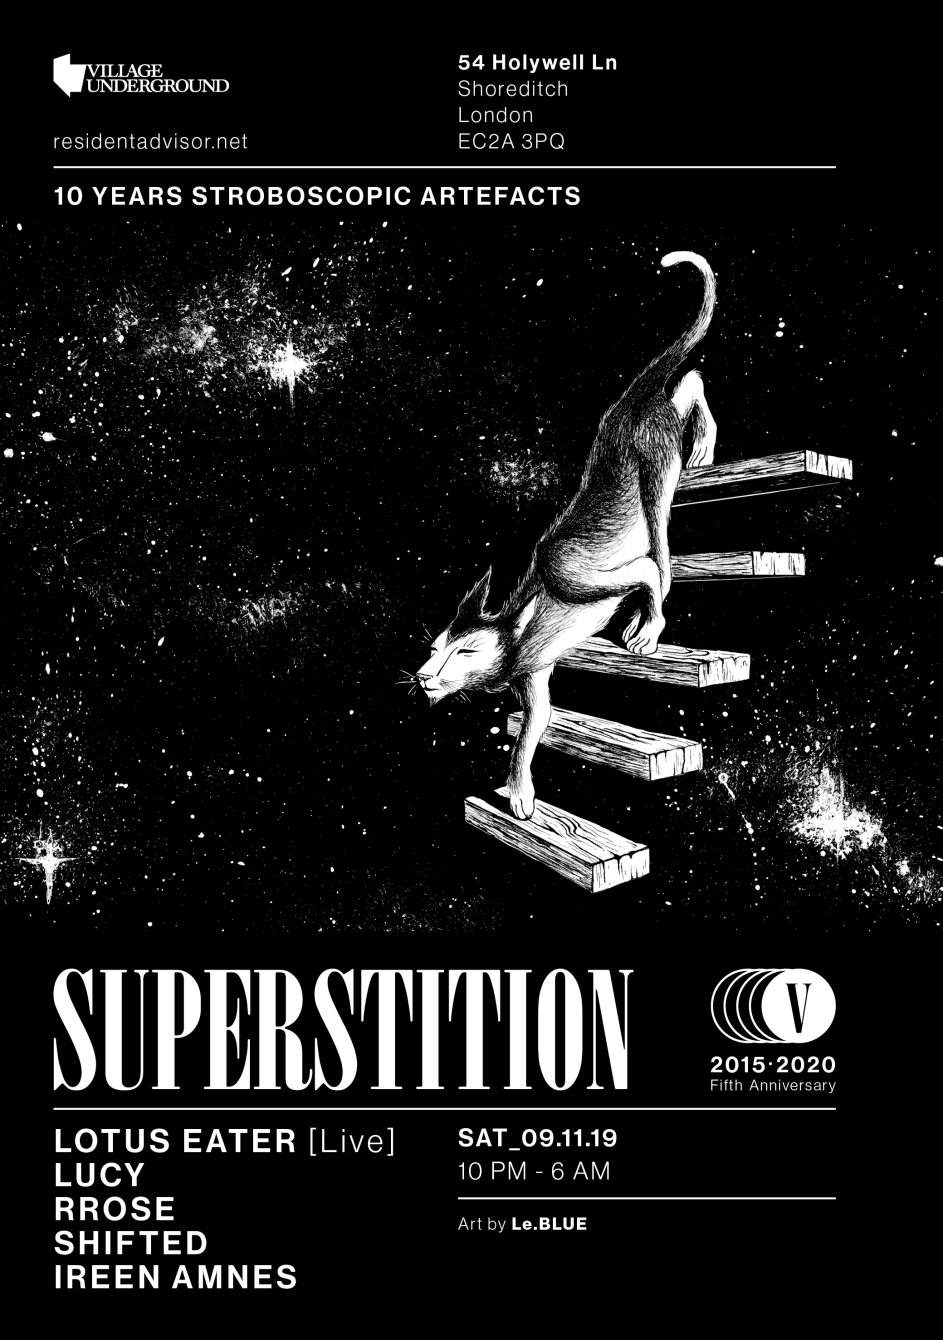 10 Years Stroboscopic Artefacts x Superstition presents: Lucy, Shifted, Rrose & Lotus Eater - Página frontal